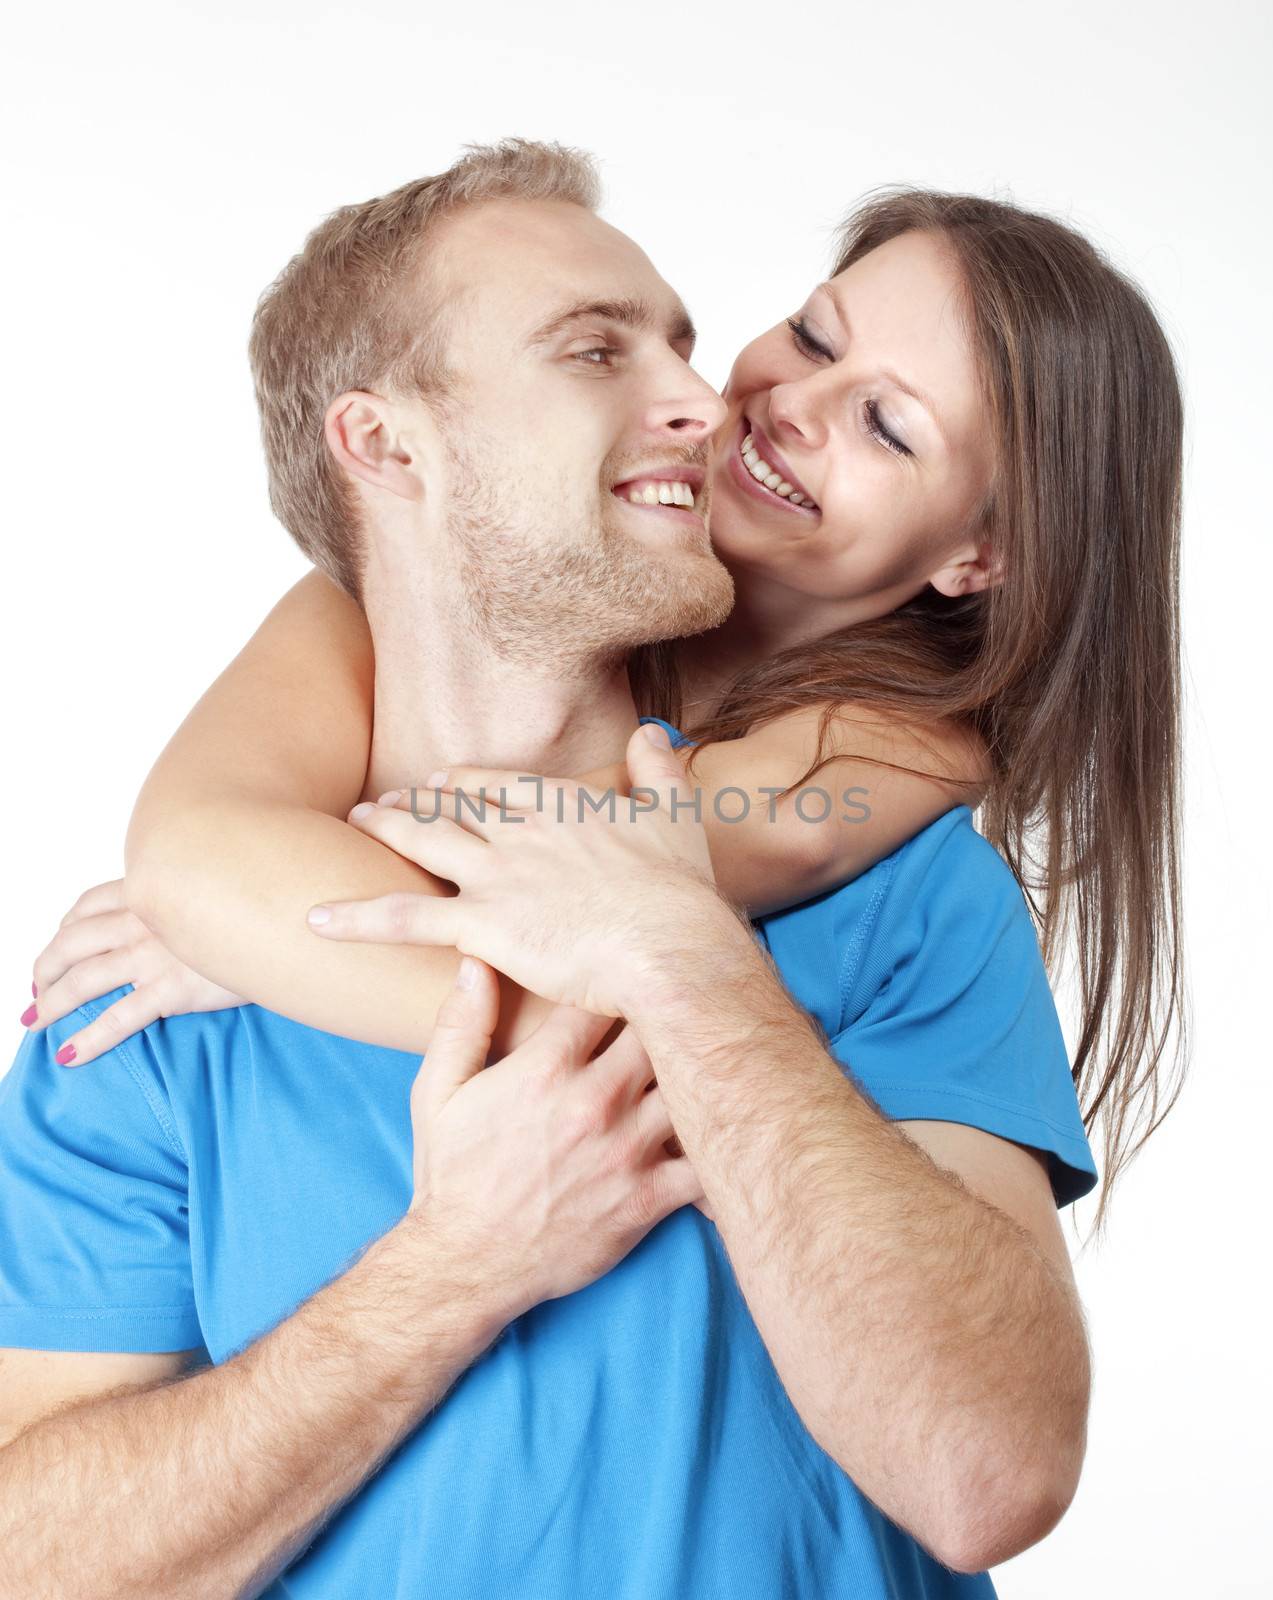 portrait of a happy young couple smiling, looking - isolated on white